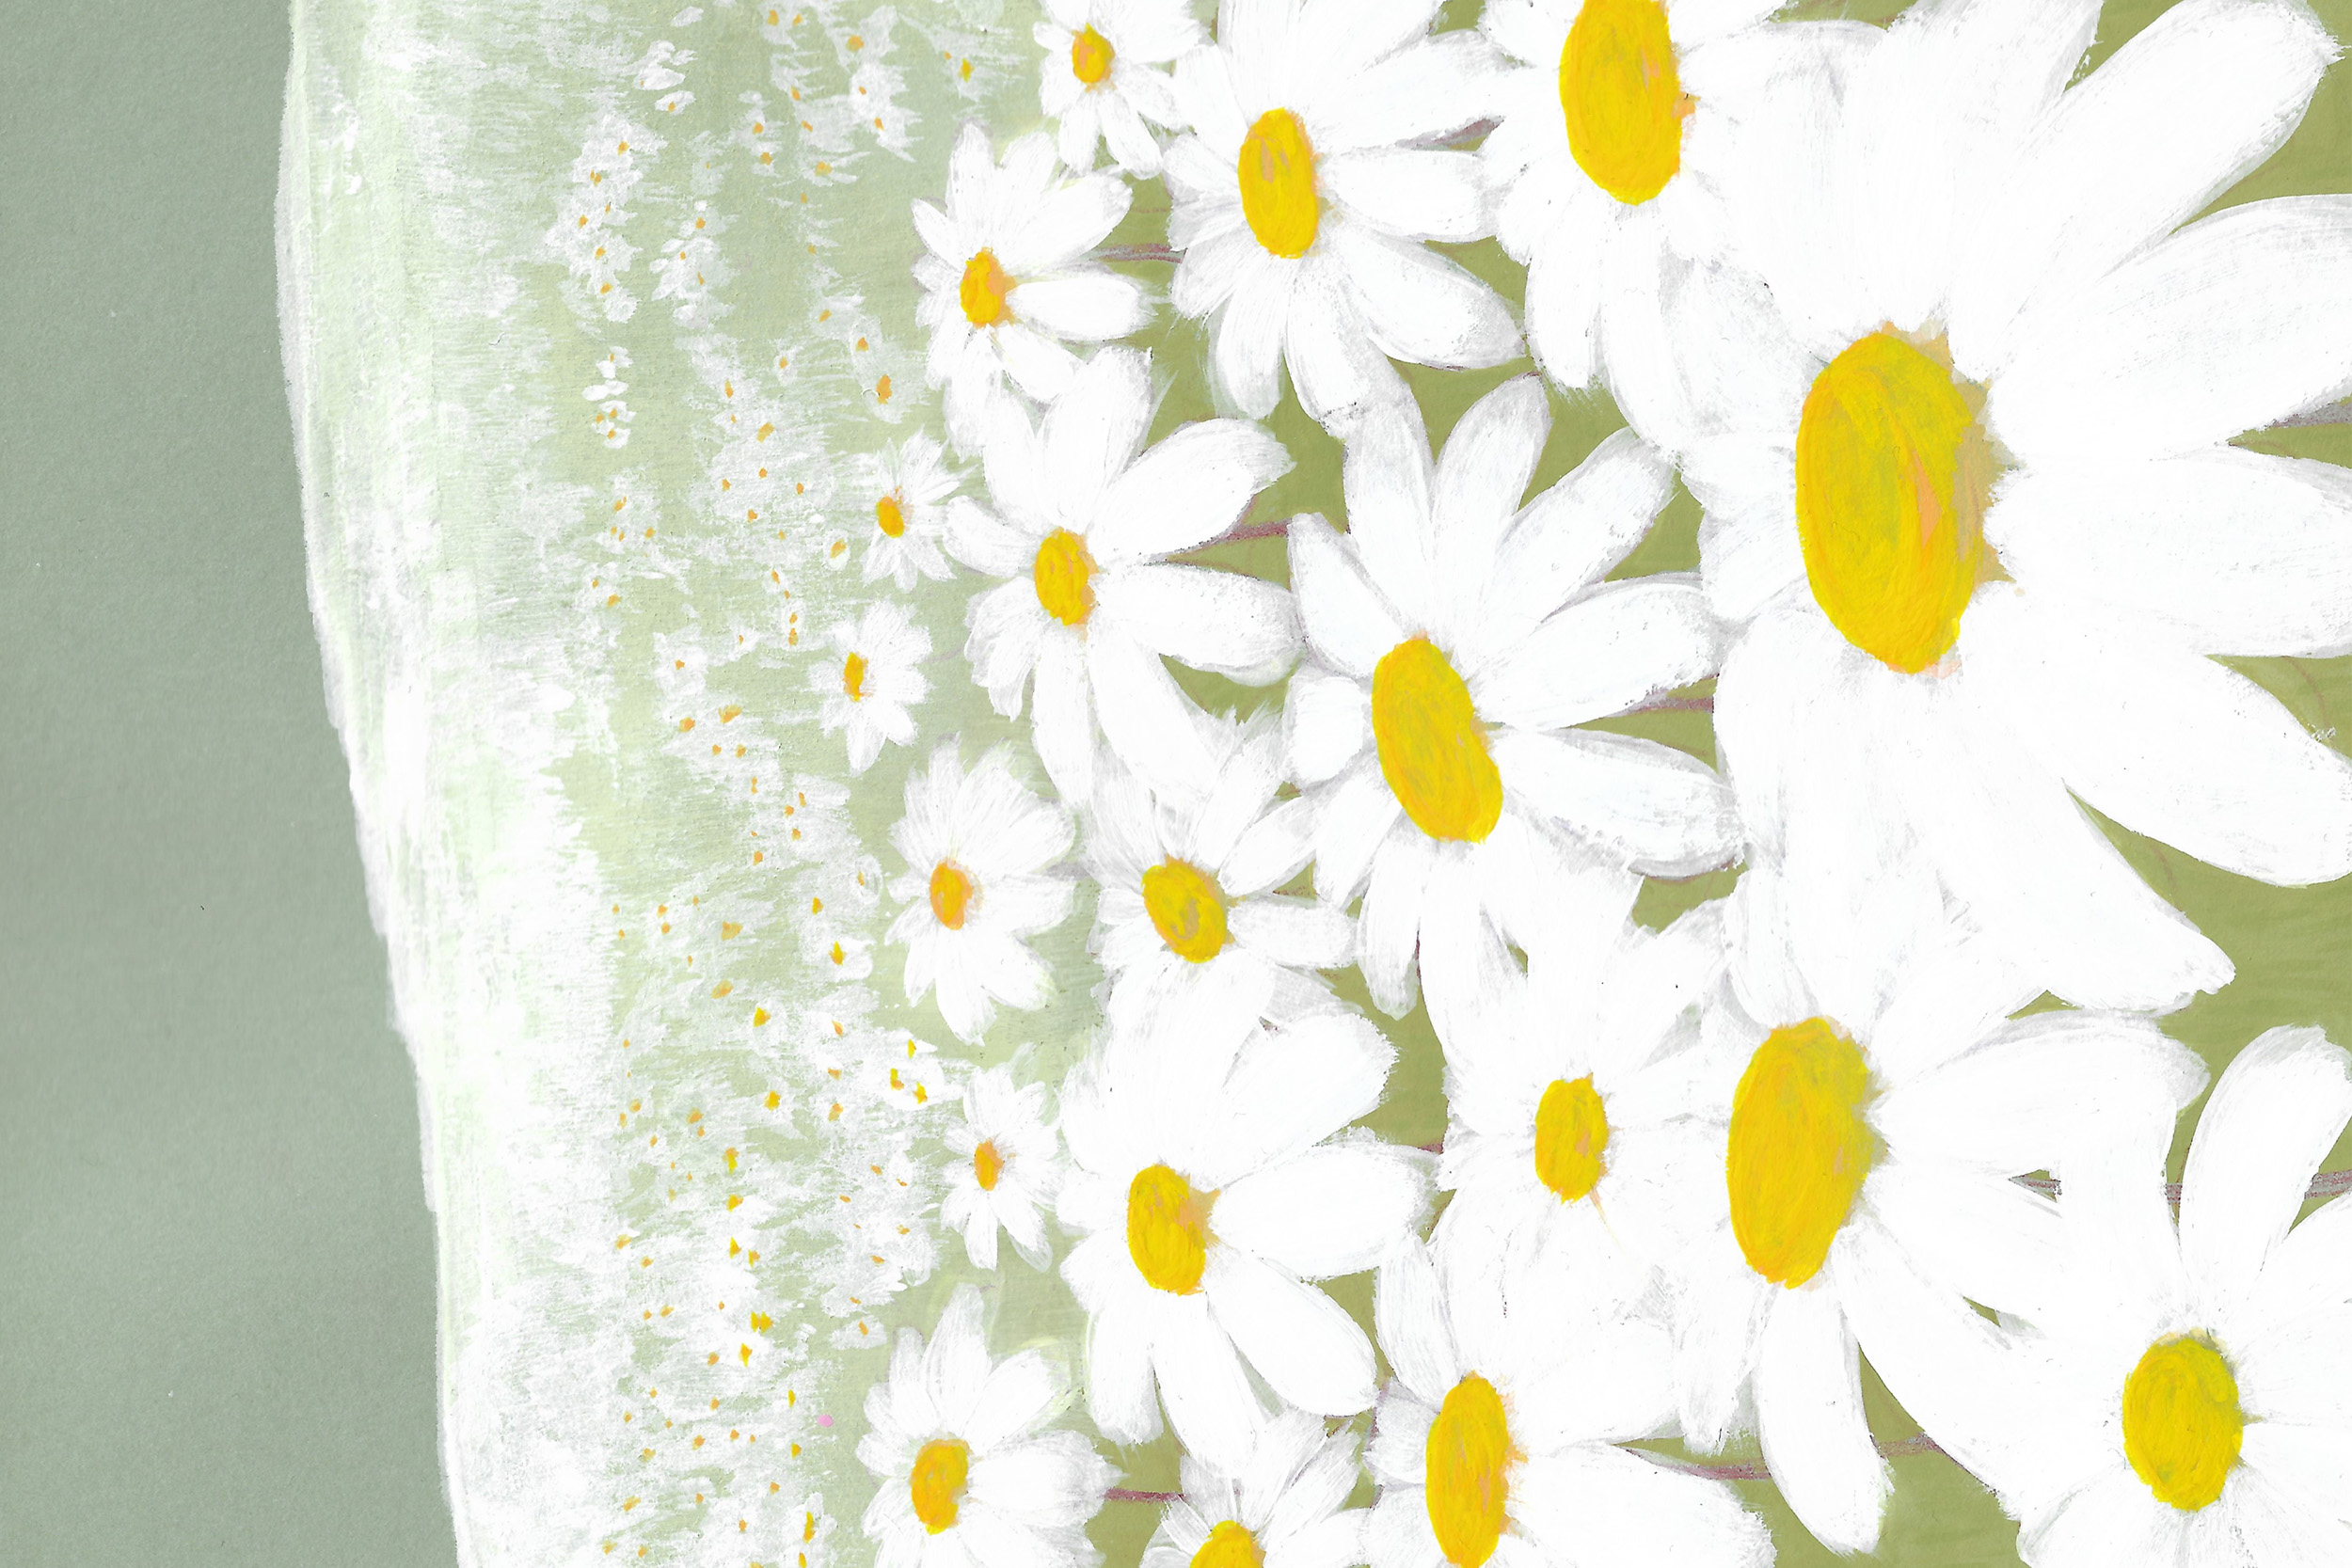 Painting of a field of daisies in gouache on a khaki green background.